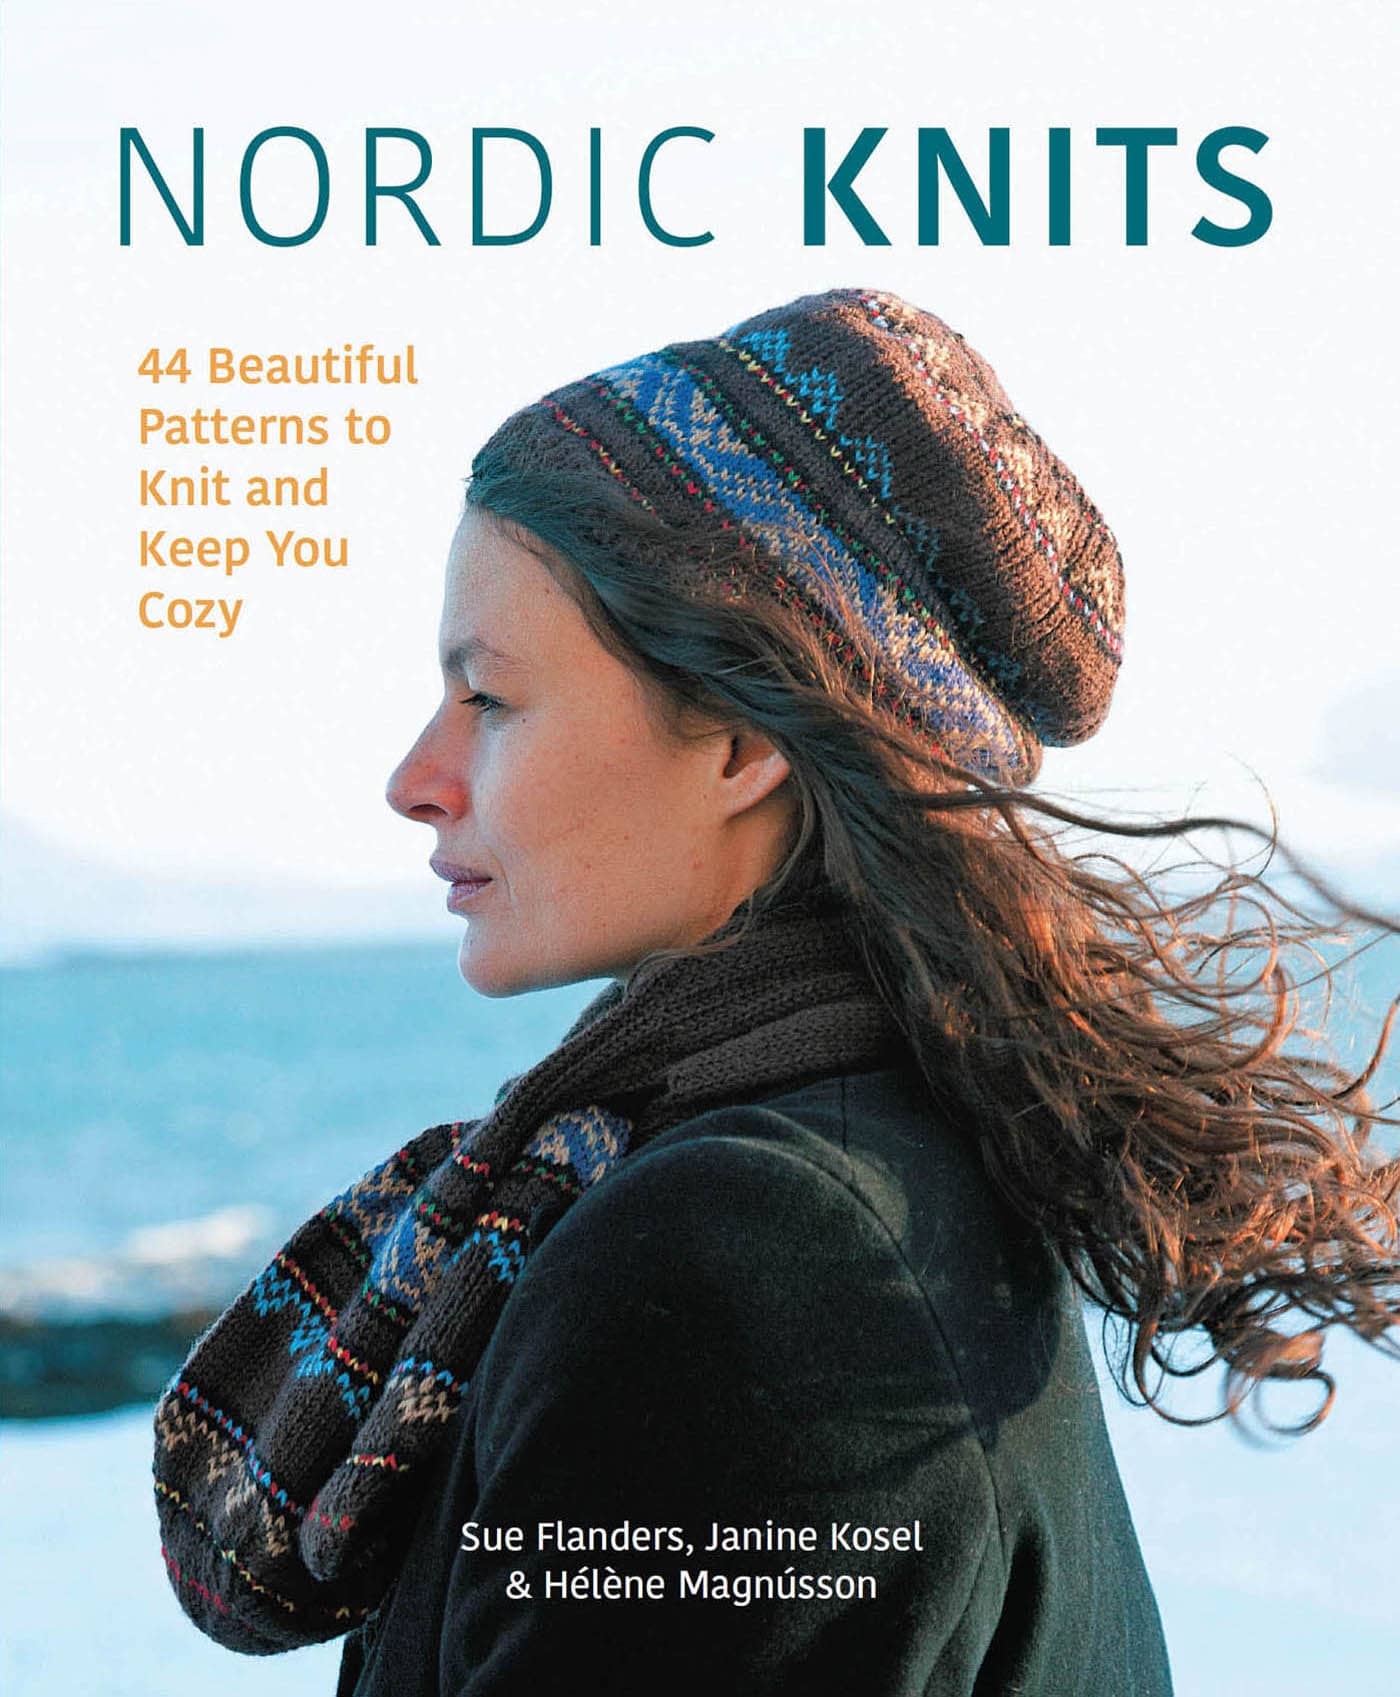 NORDIC KNITS 44 Beautiful Patterns to Knit and Keep You Cozy Sue Flanders - photo 1